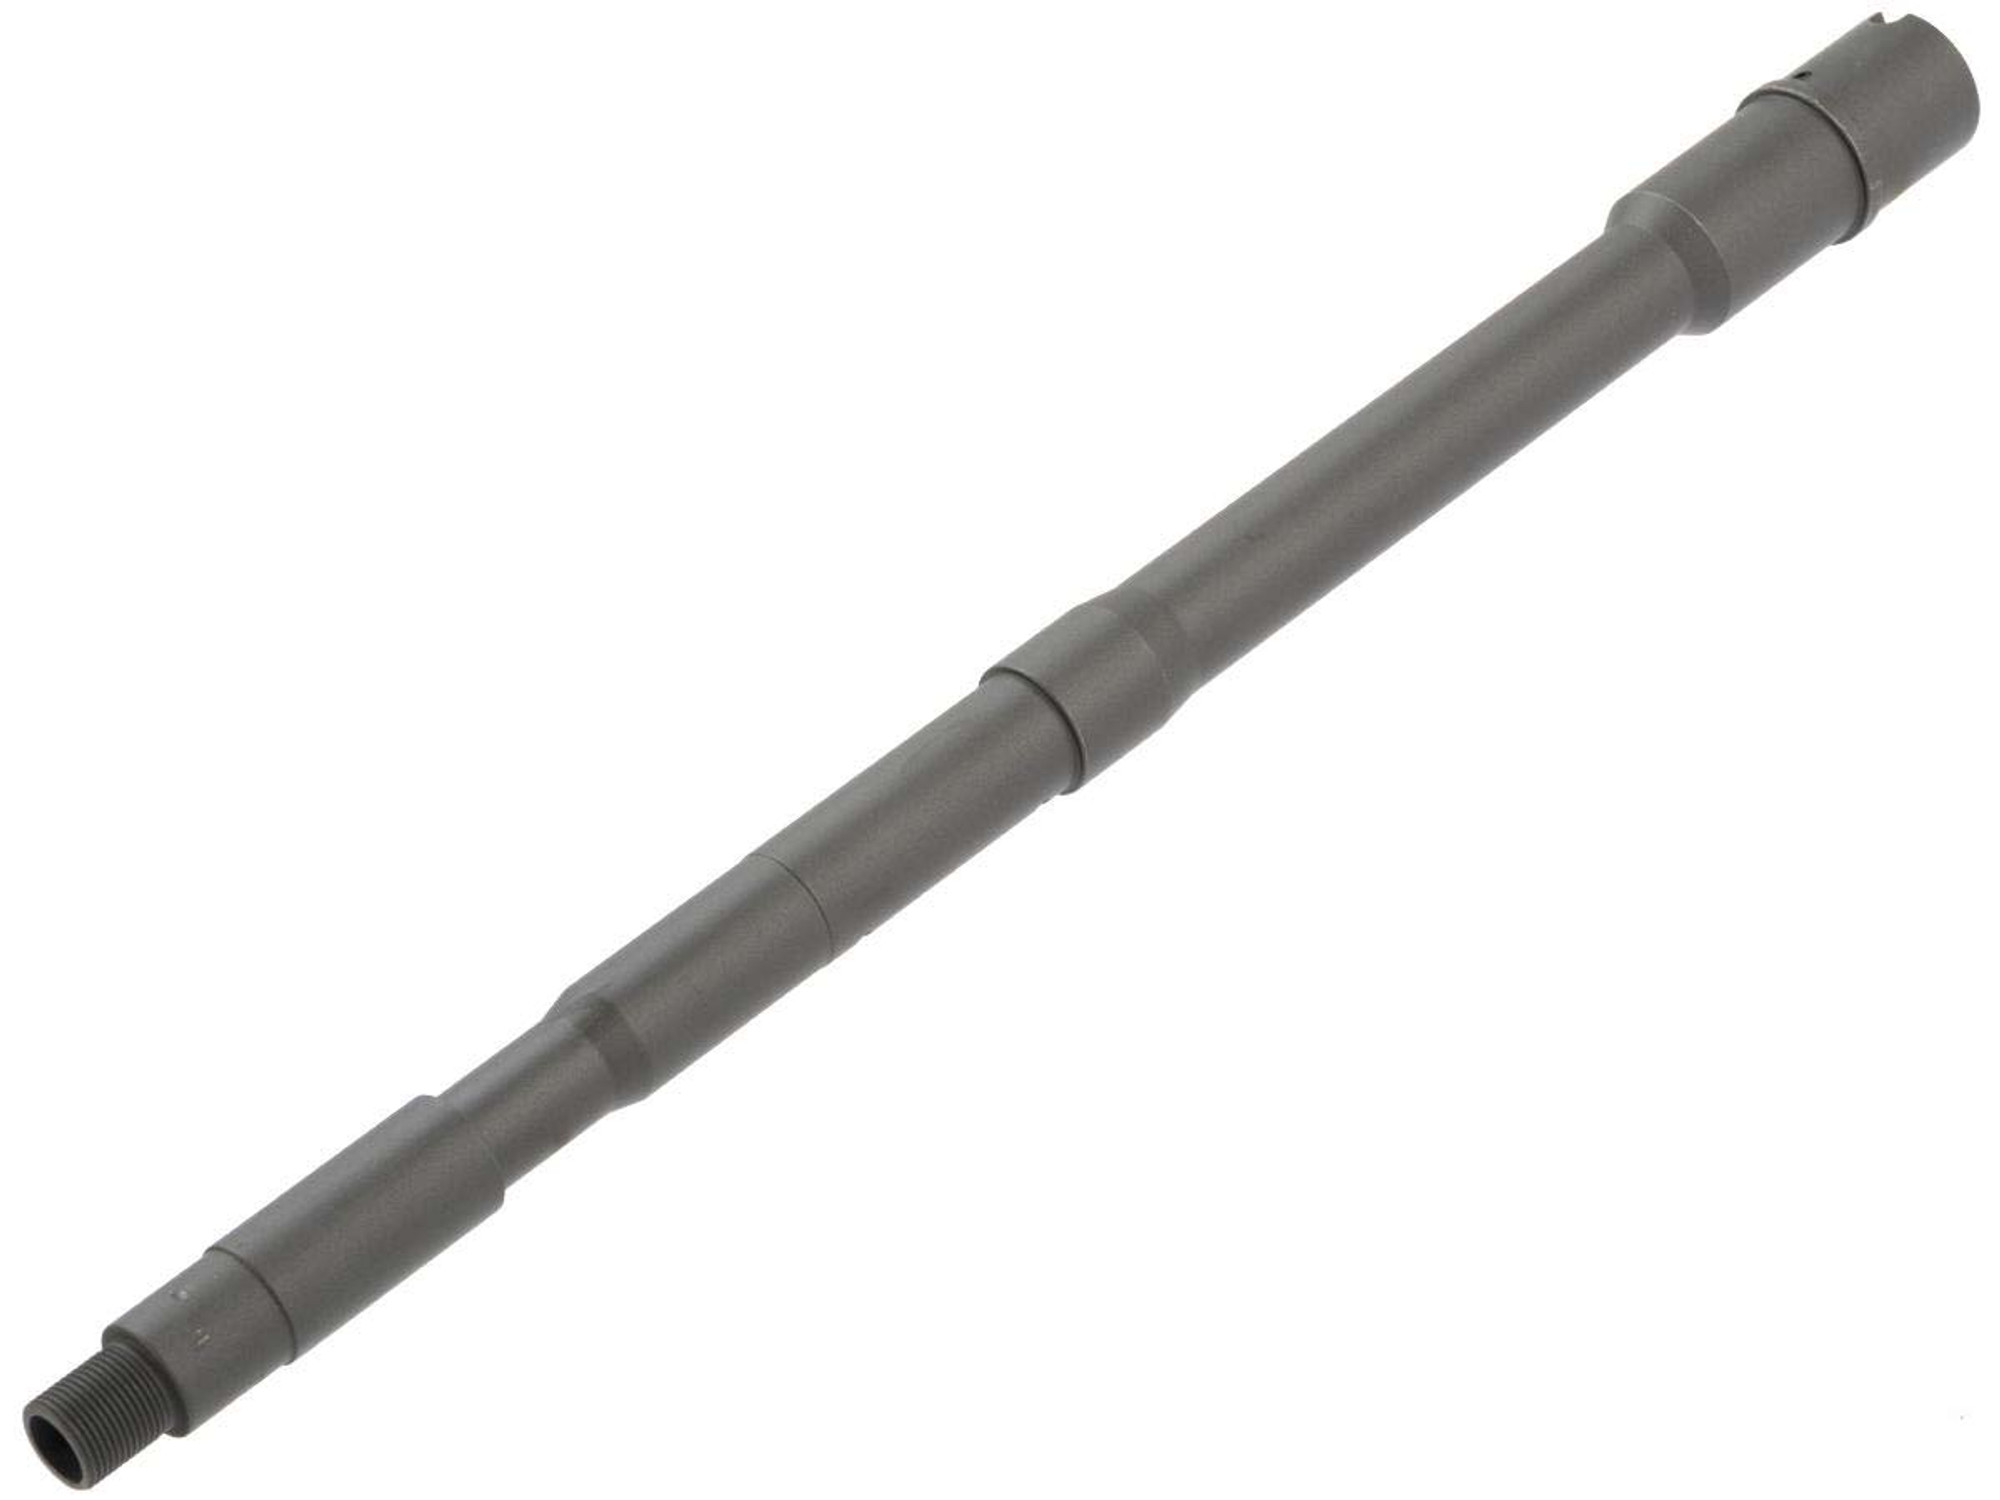 UFC Steel 15" M16 Outer Barrel for Airsoft A&K STW Rifles